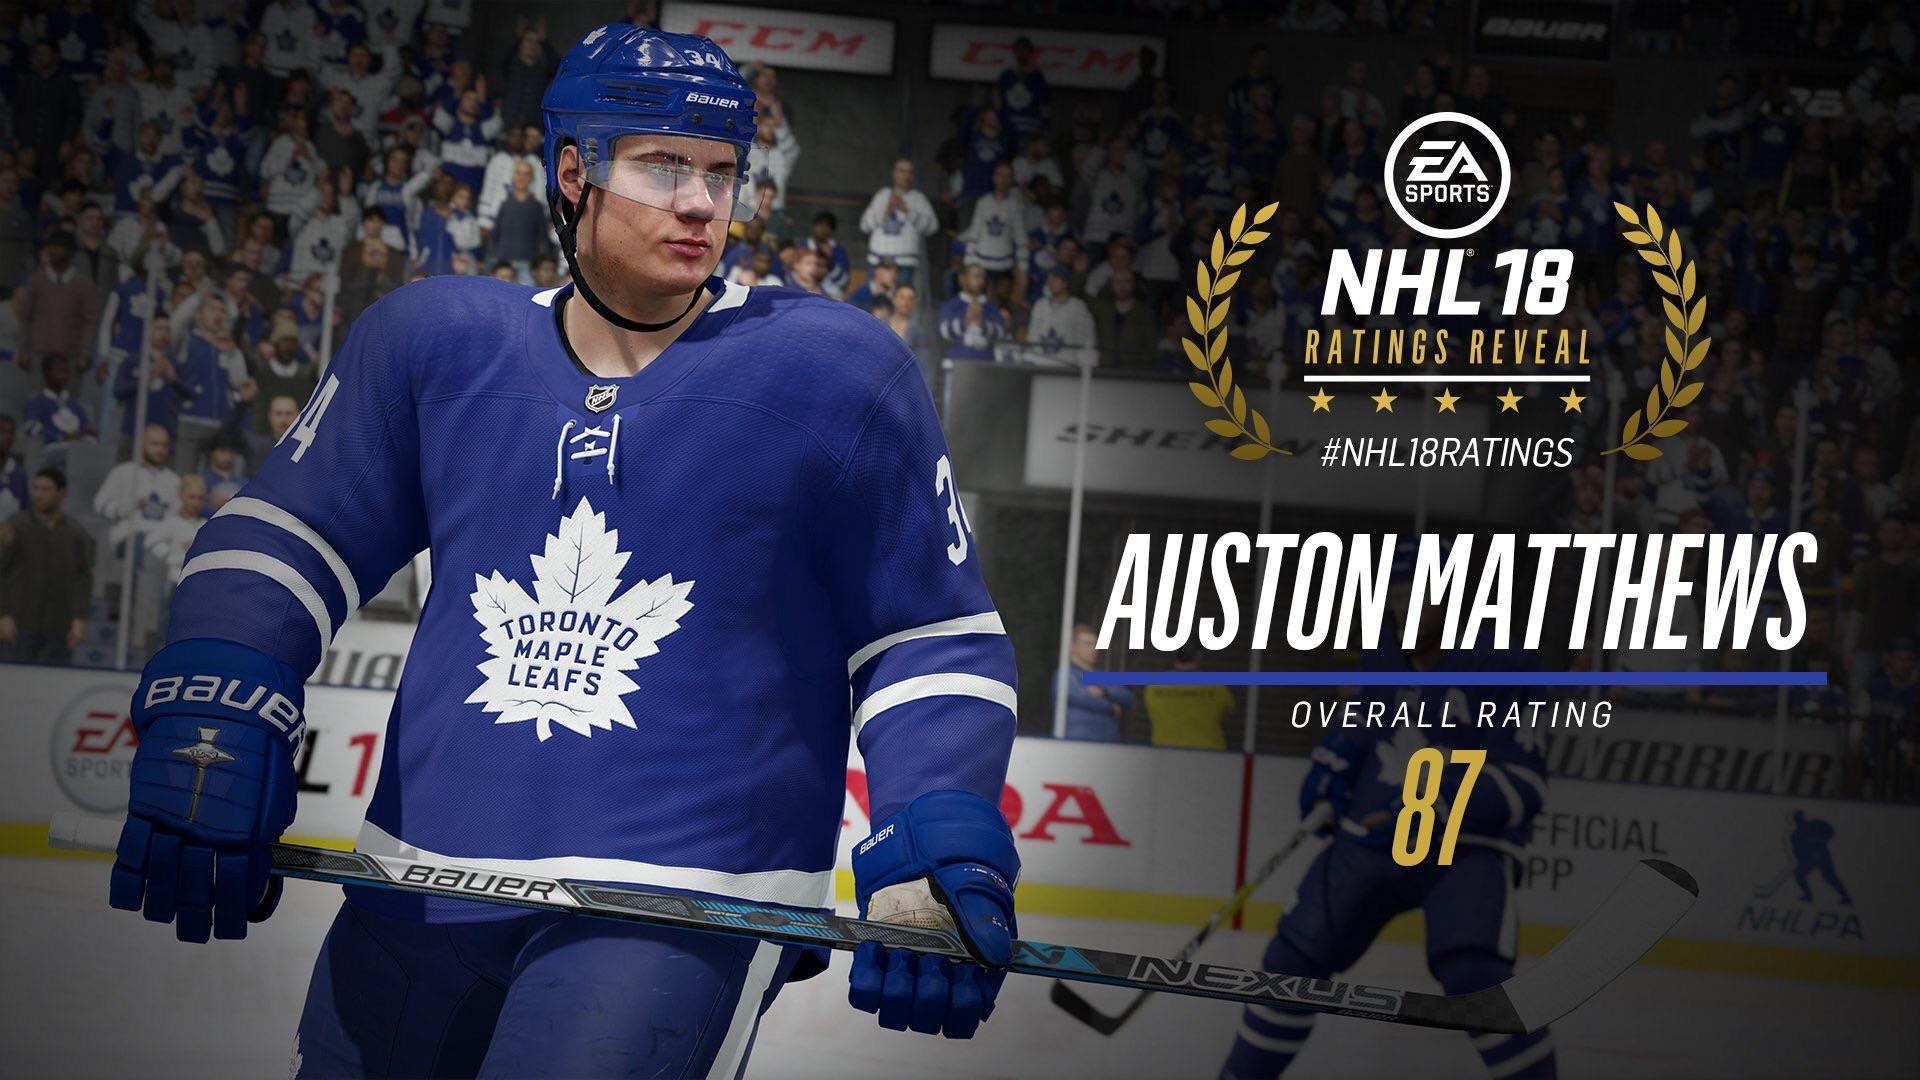 Auston Matthews is rated an 87 in NHL 18 and he's a LEAF!